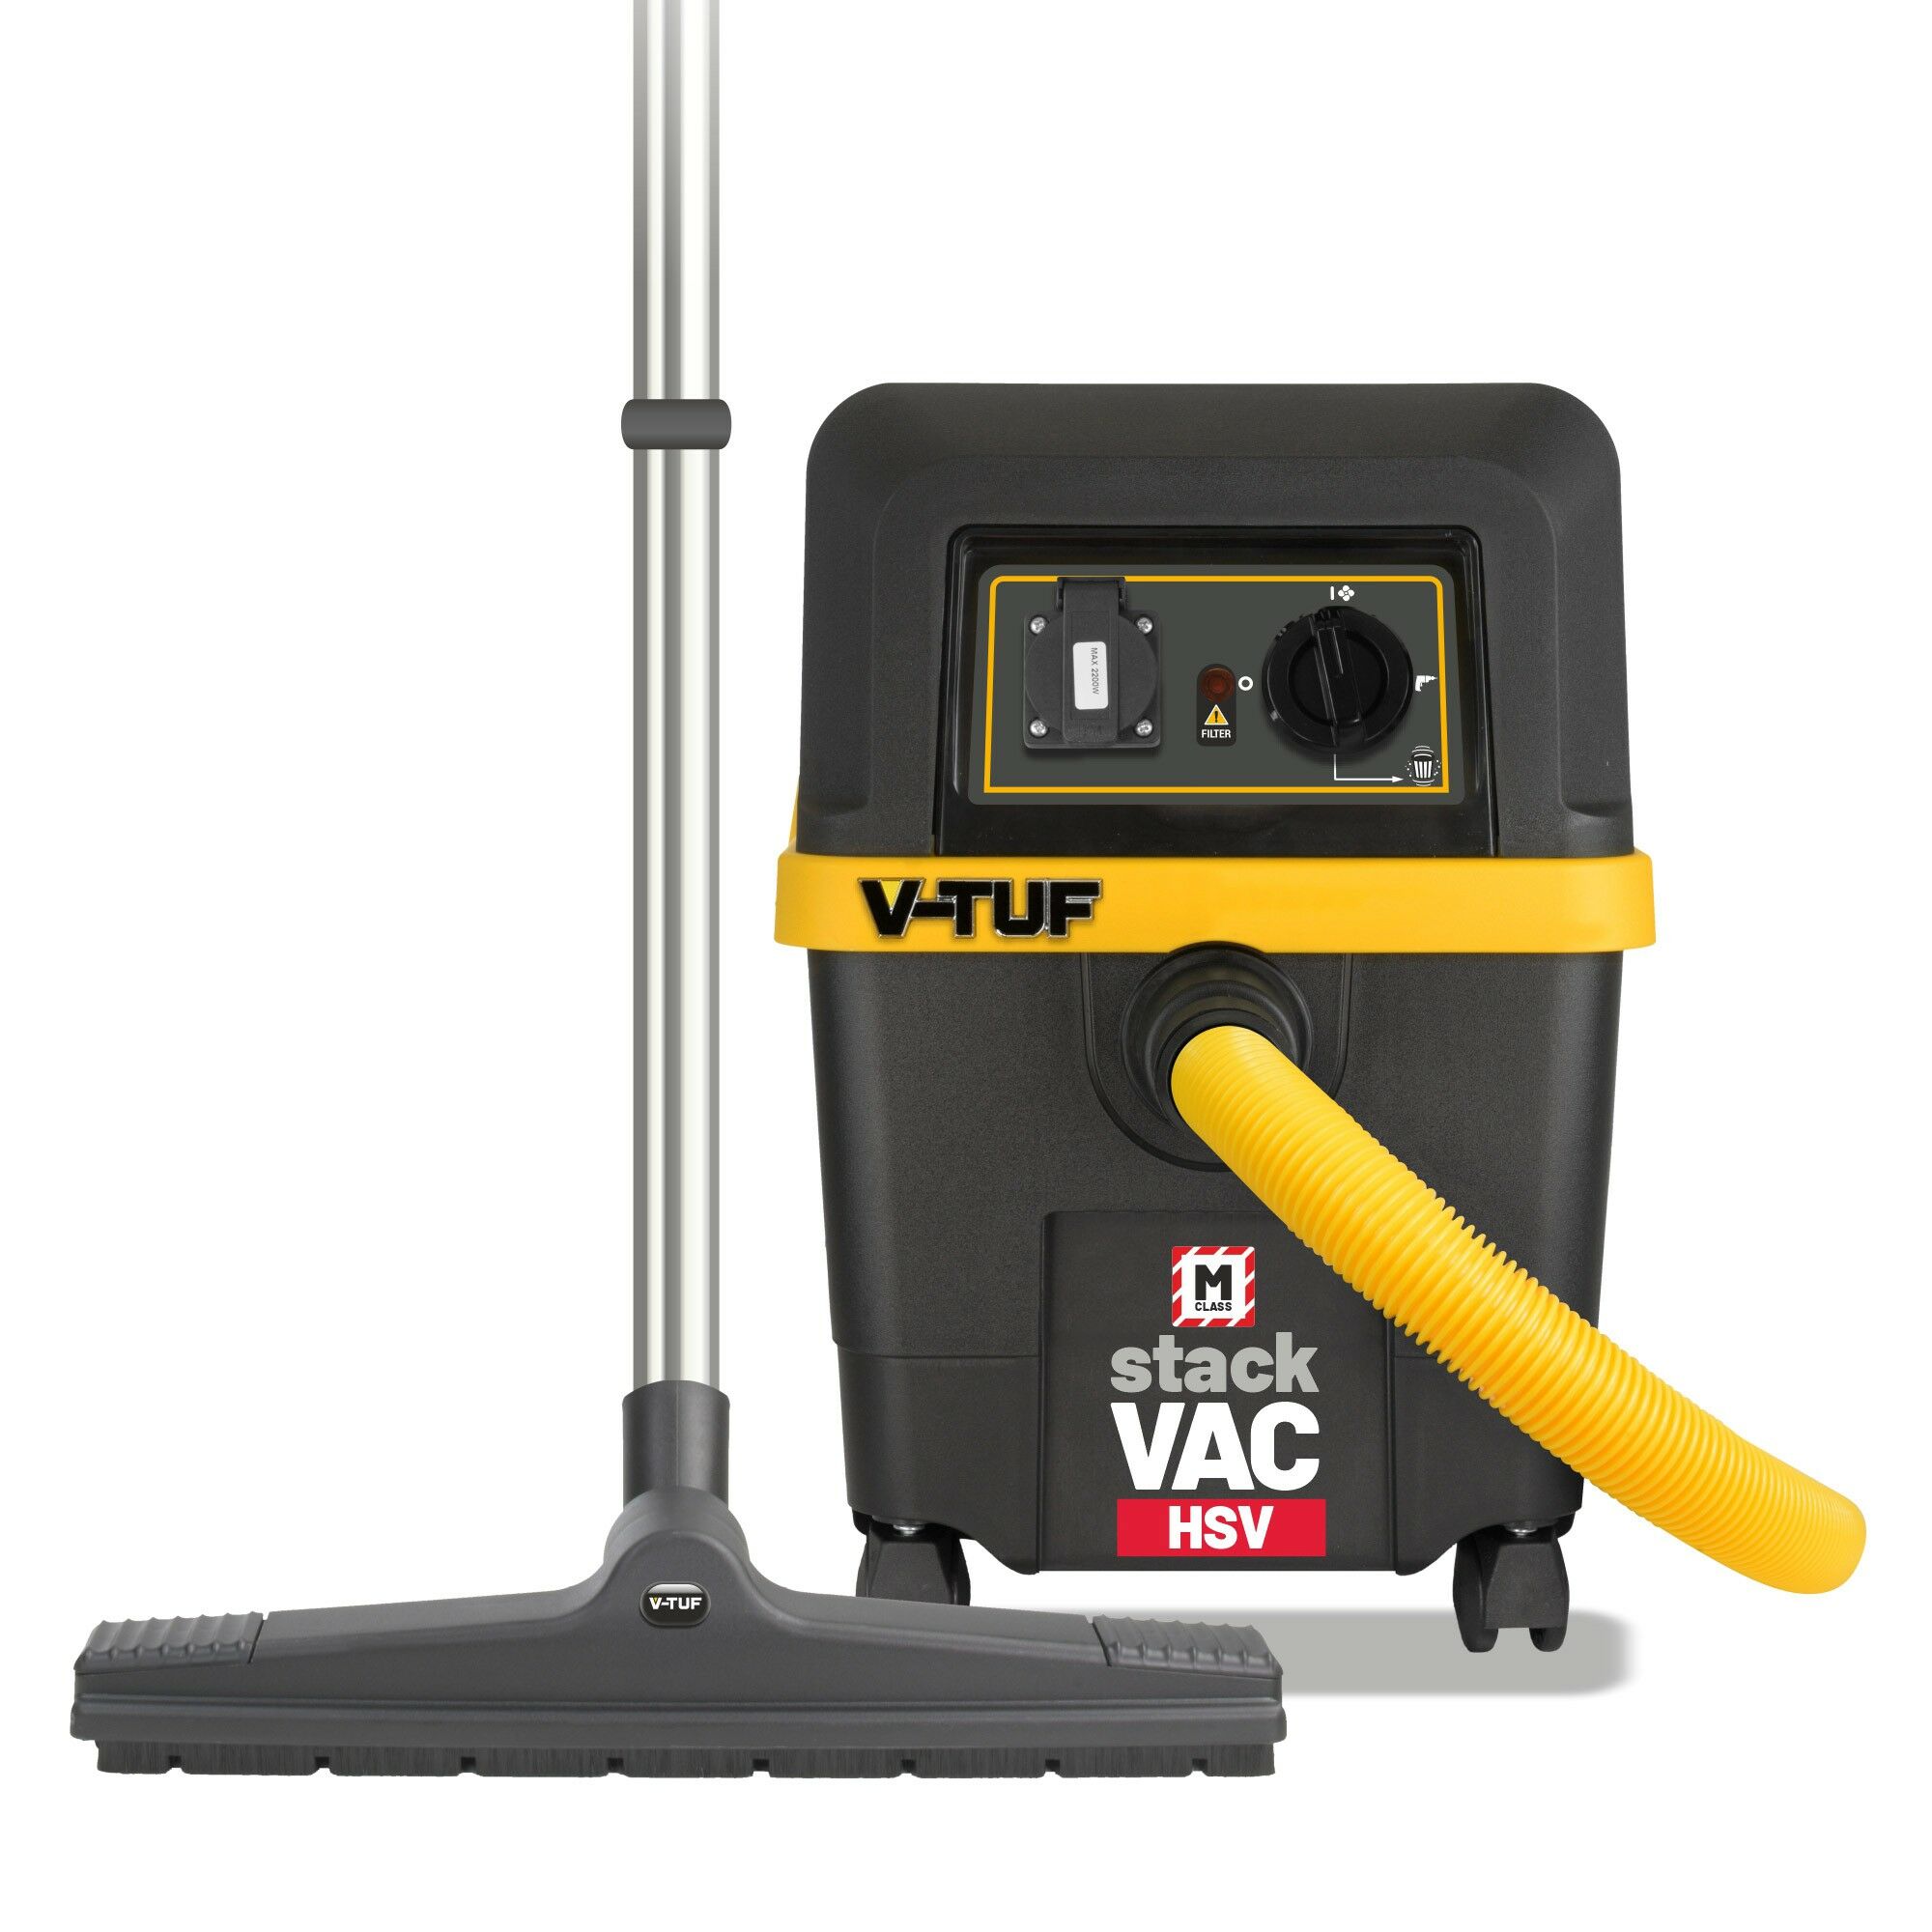 V-TUF STACKVAC HSV 240v 30L M-Class Dust Extractor Wet & Dry - with Power Take Off - Health & Safety Version